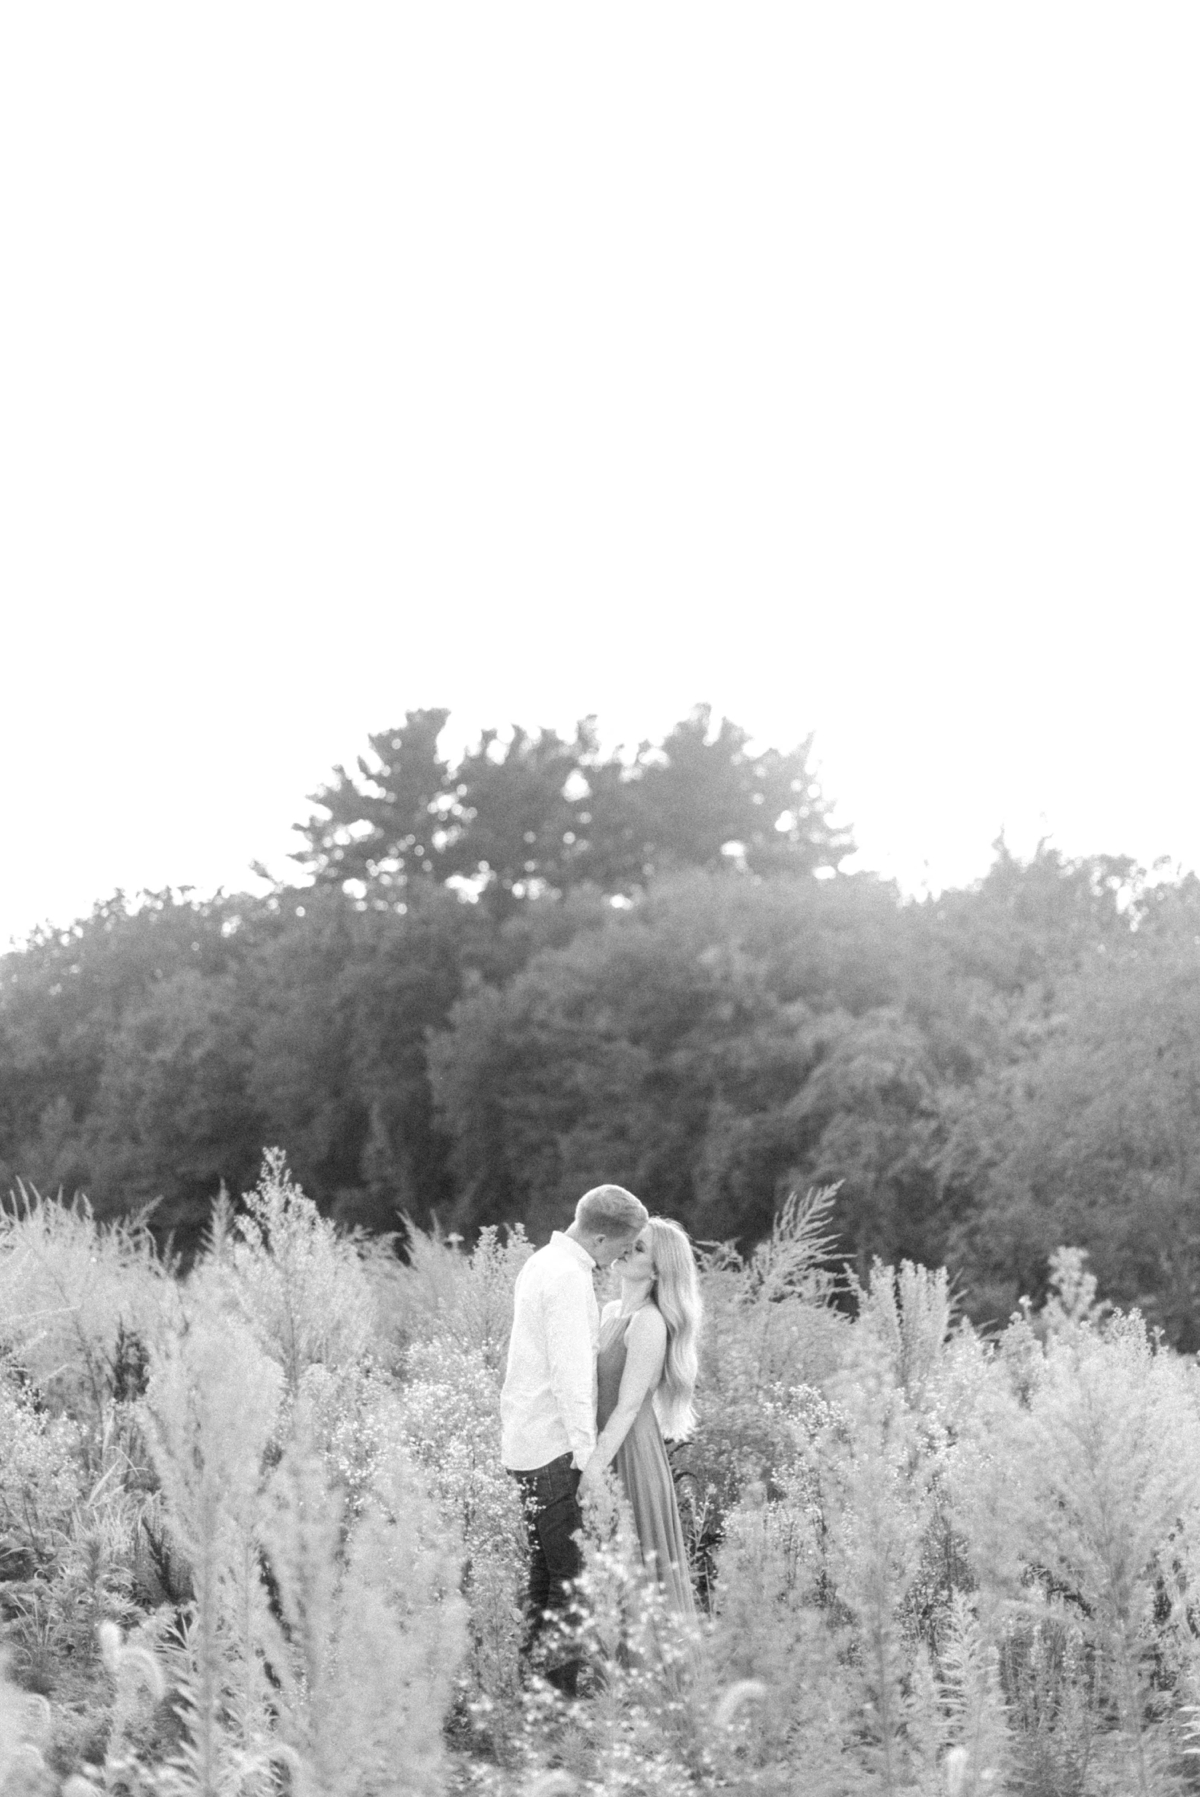 Sunny Summer Engagement Session at Smolak Farms in North Andover, Massachusetts by Boston Wedding Photographer Annmarie Swift